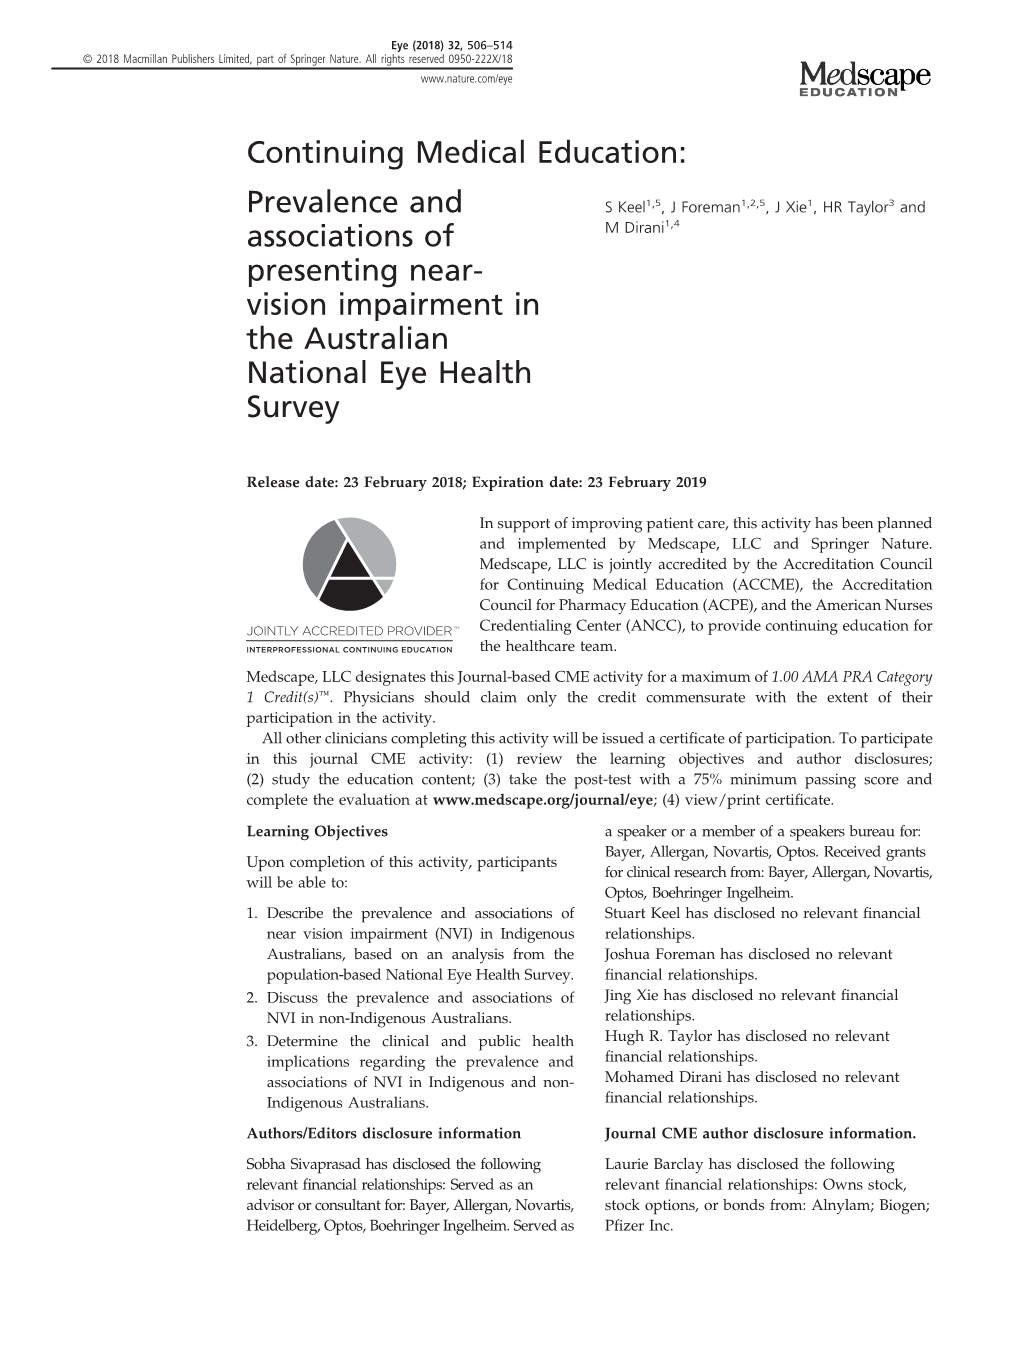 Prevalence and Associations of Presenting Near-Vision Impairment in the Australian National Eye Health Survey